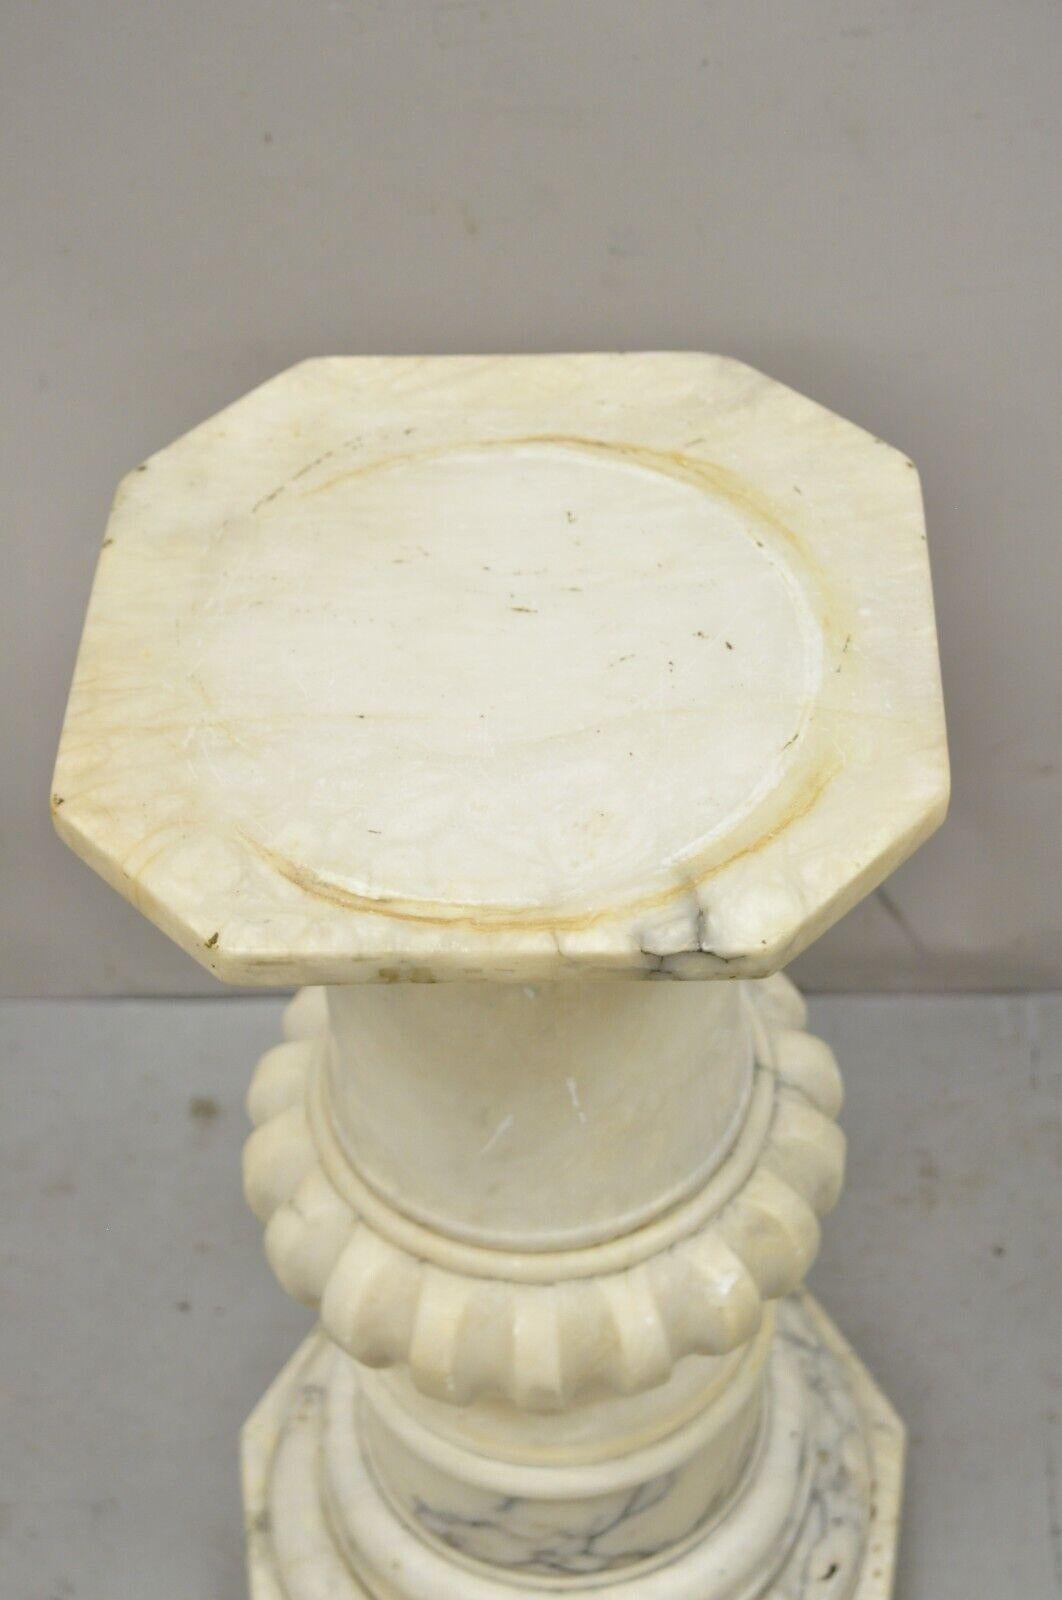 marble pedestal plant stand